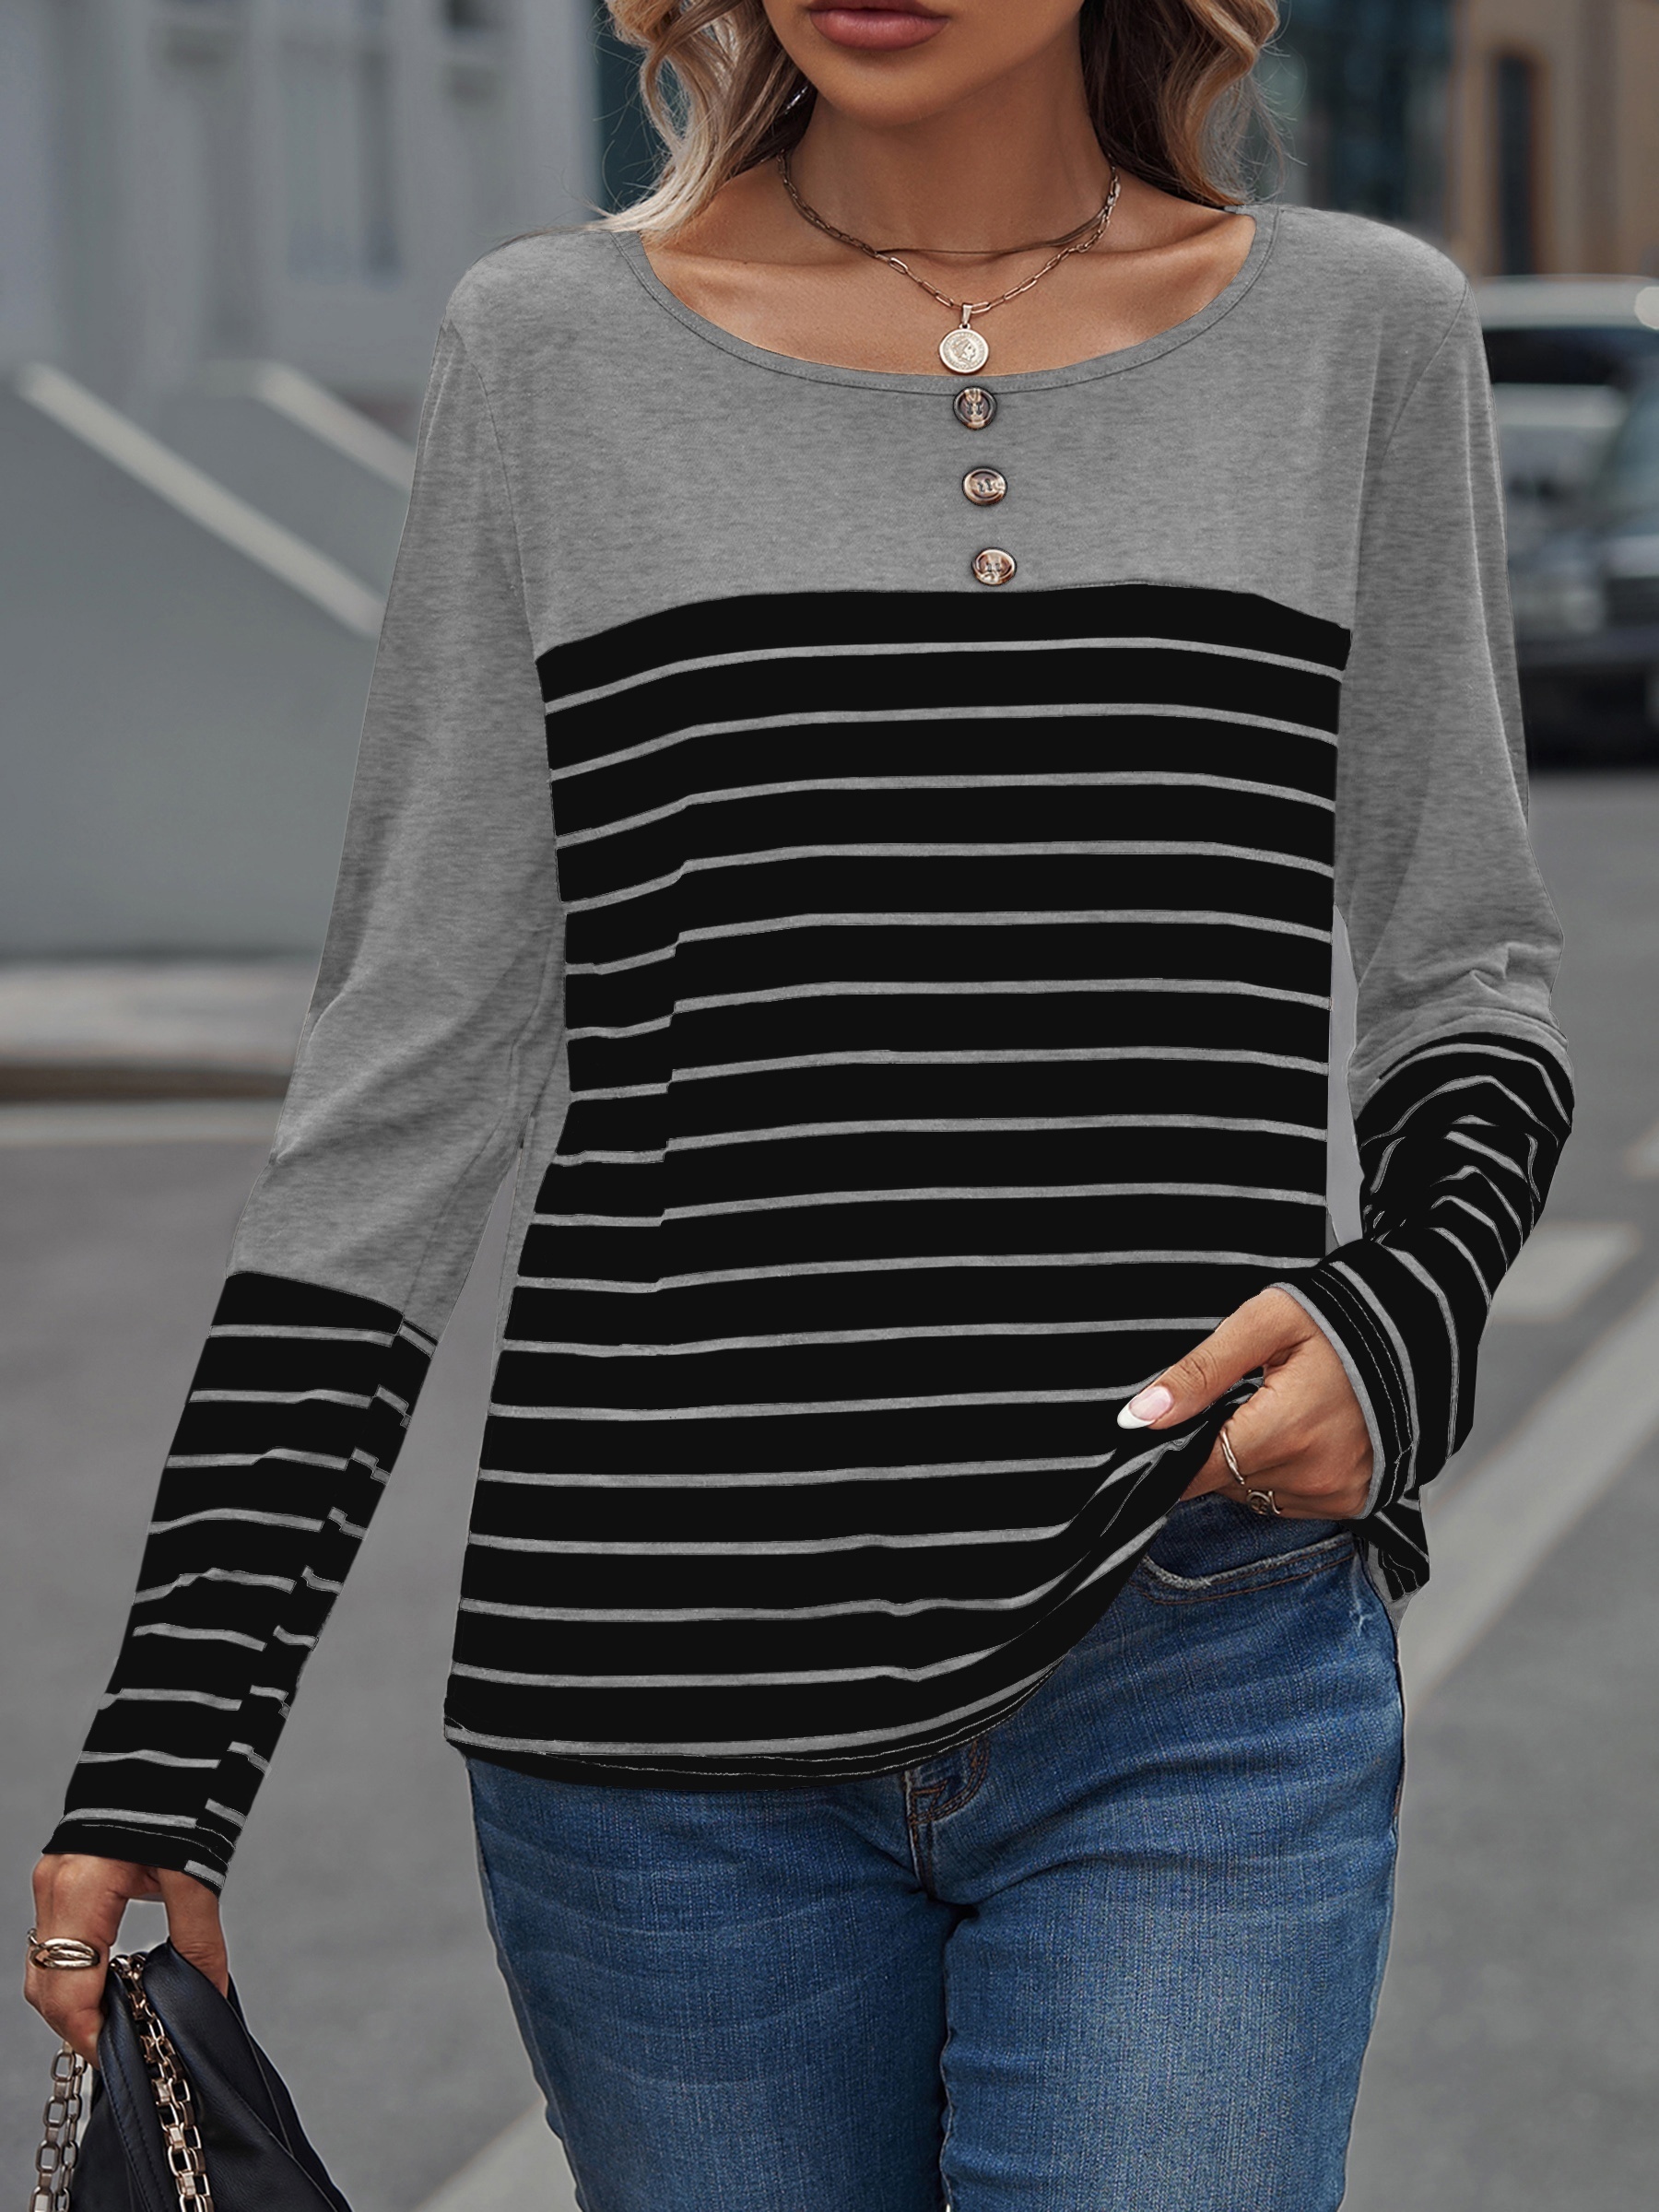 Brandy Melville red cropped sweater Black And White Trim On Neck